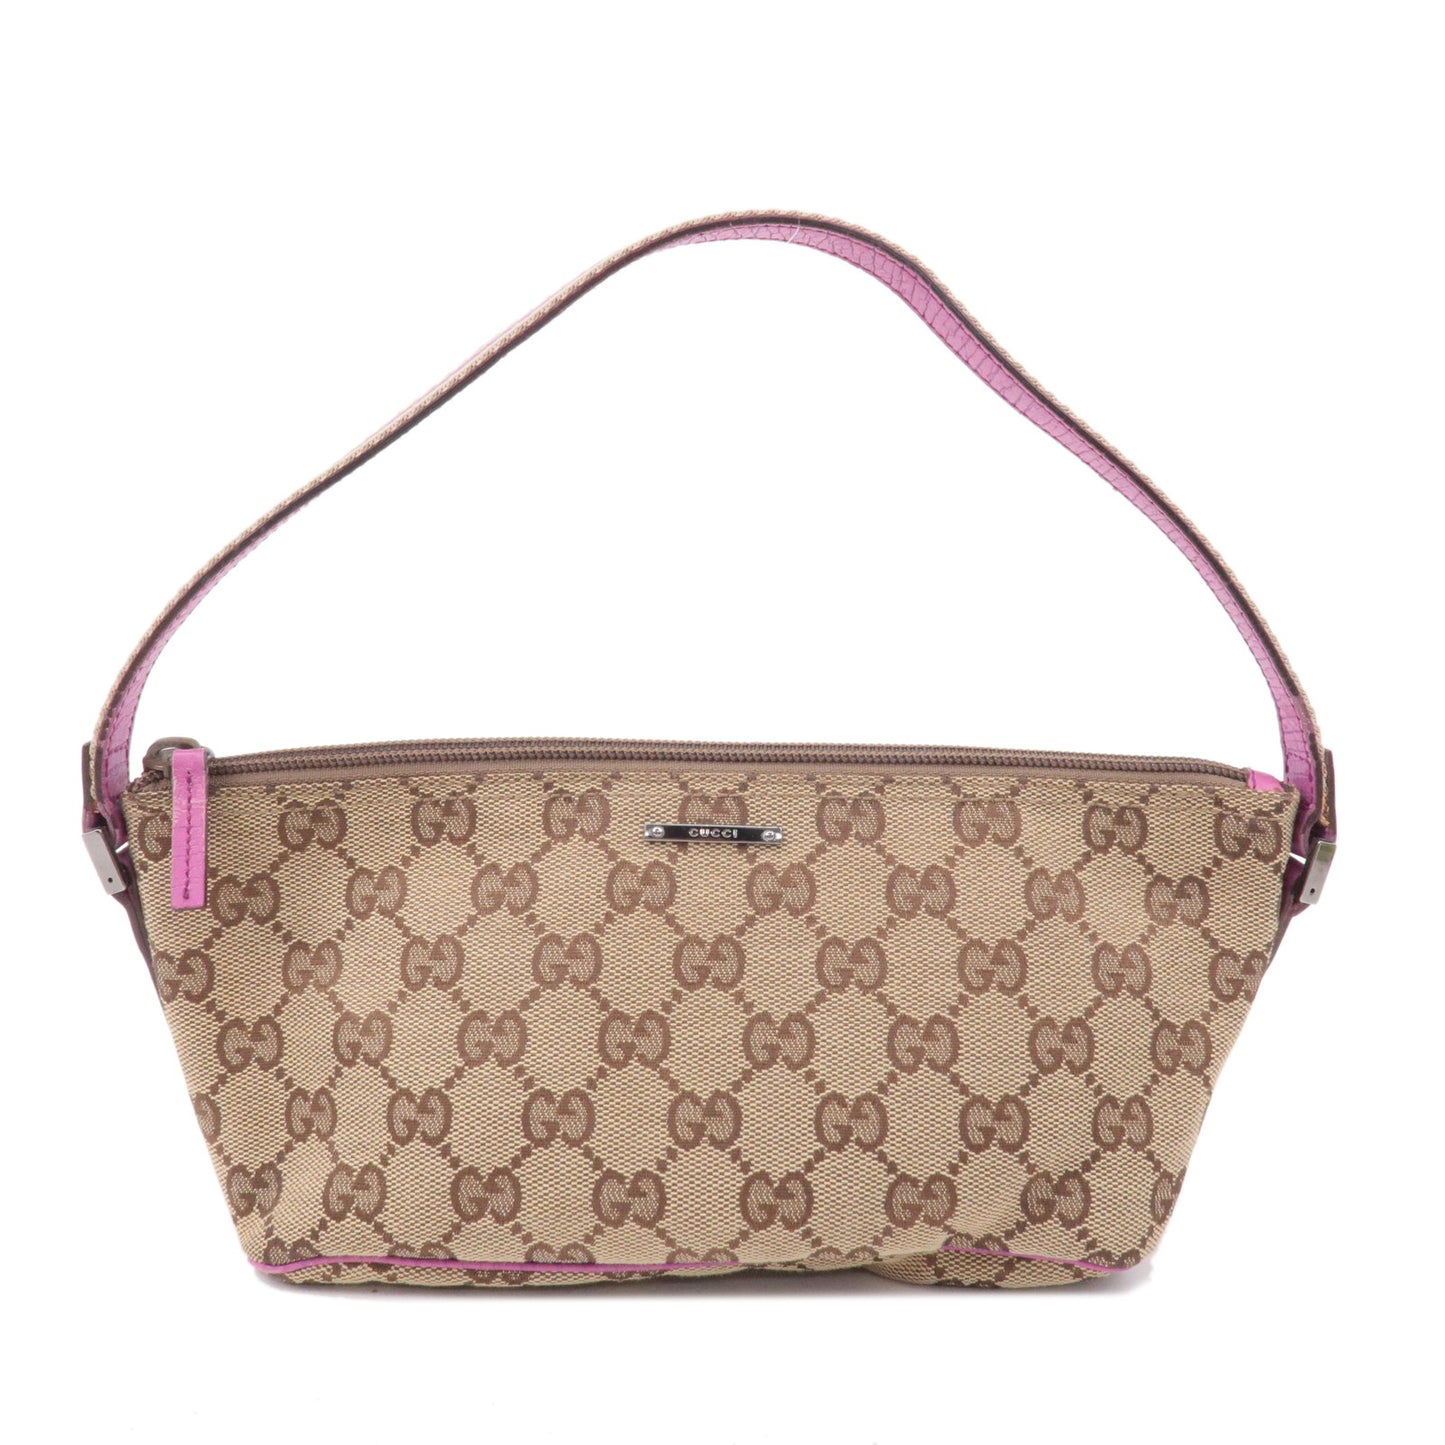 GUCCI-Boat-Bag-GG-Canvas-Leather-Pouch-Beige-Pink-141809